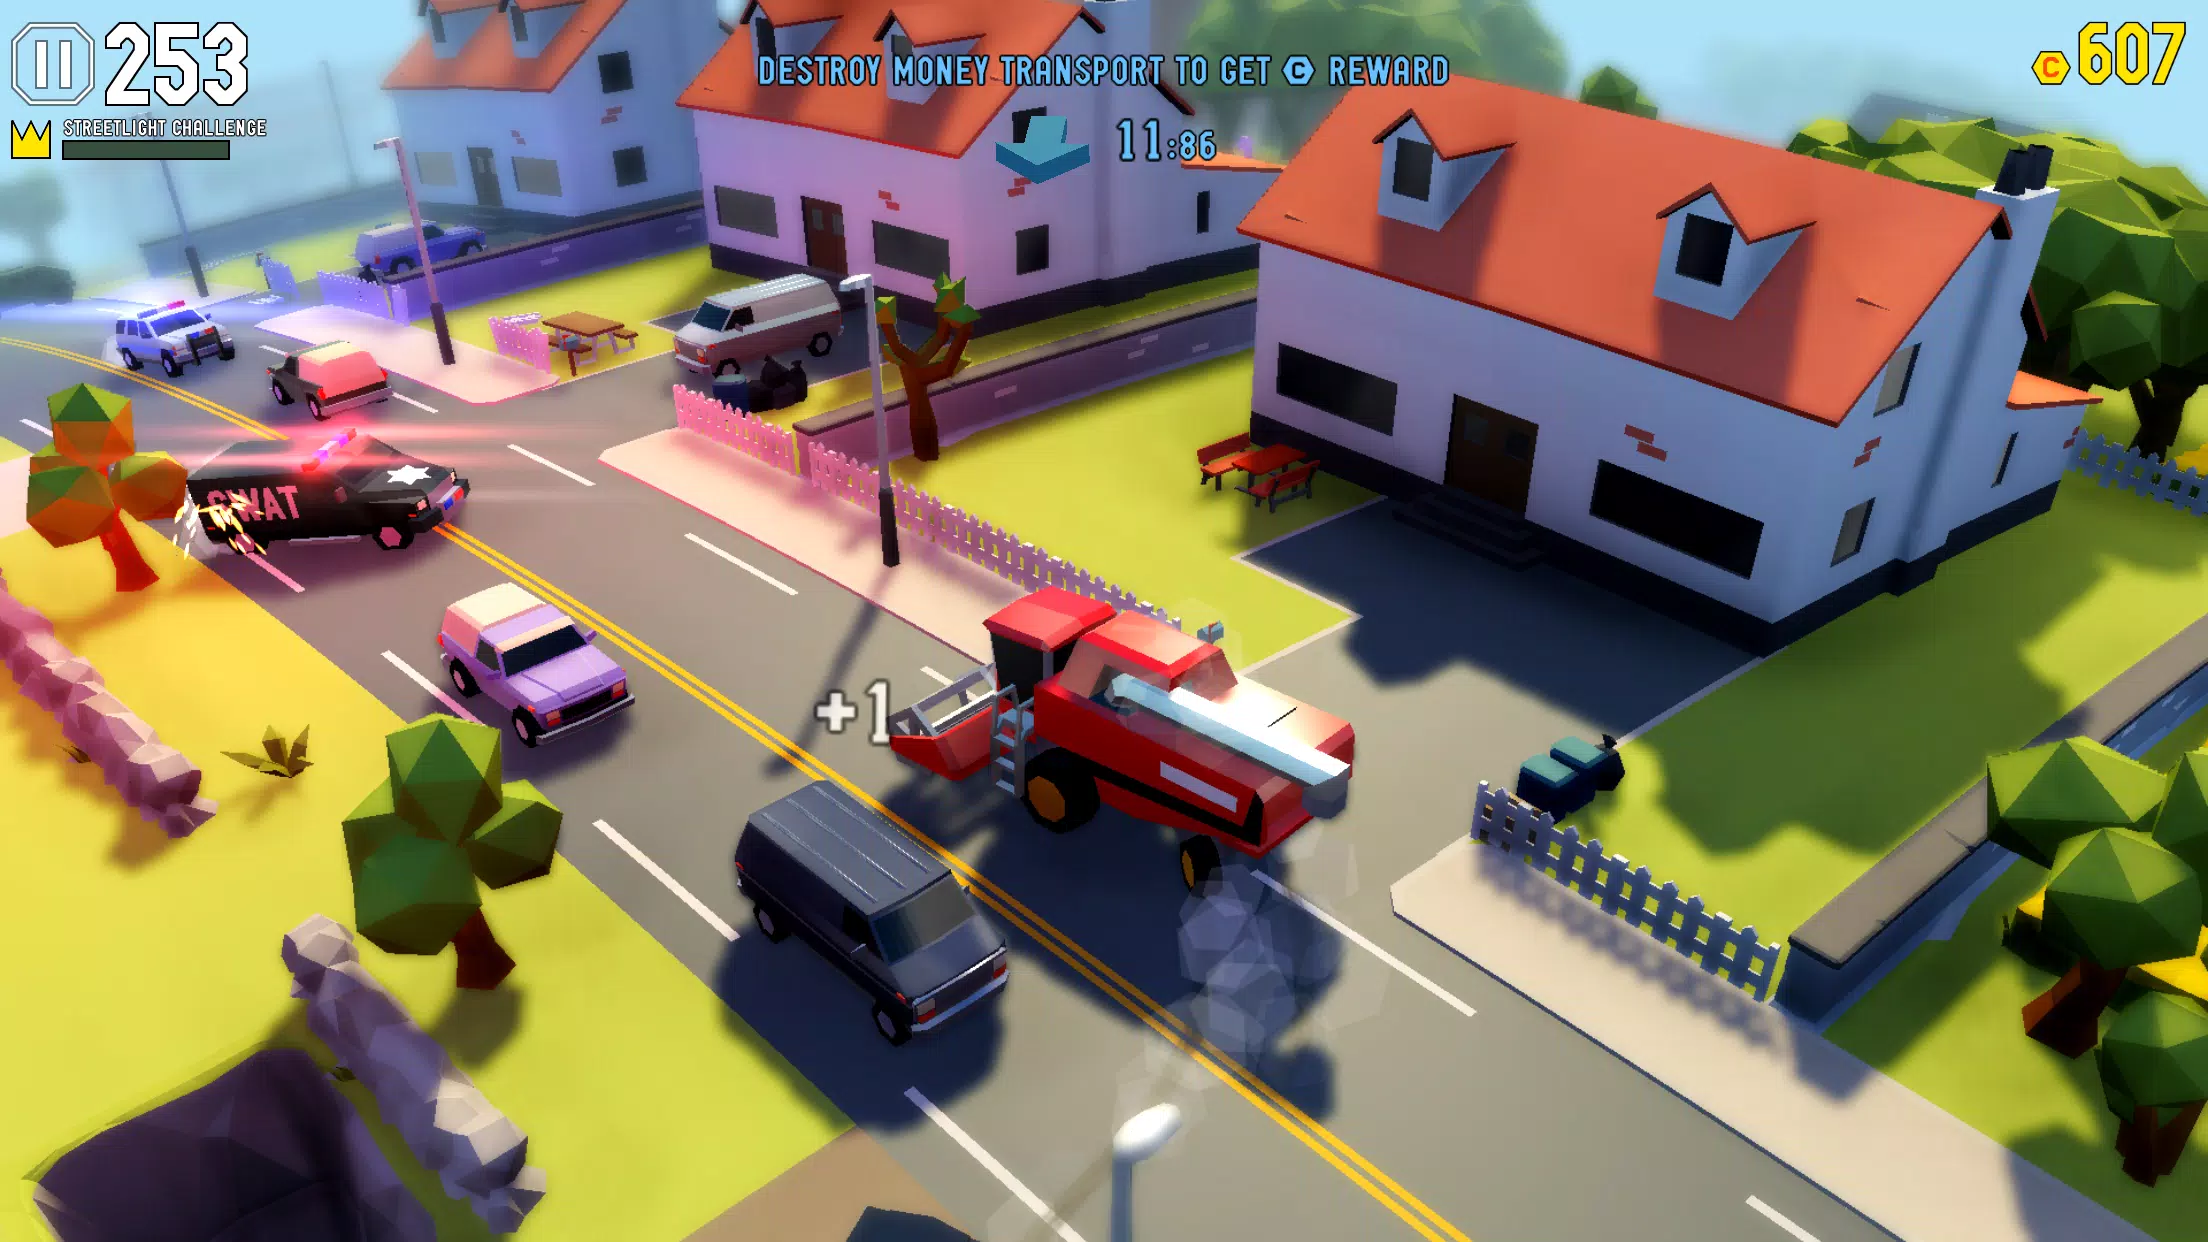 Reckless Getaway 2 APK Download for Android Free